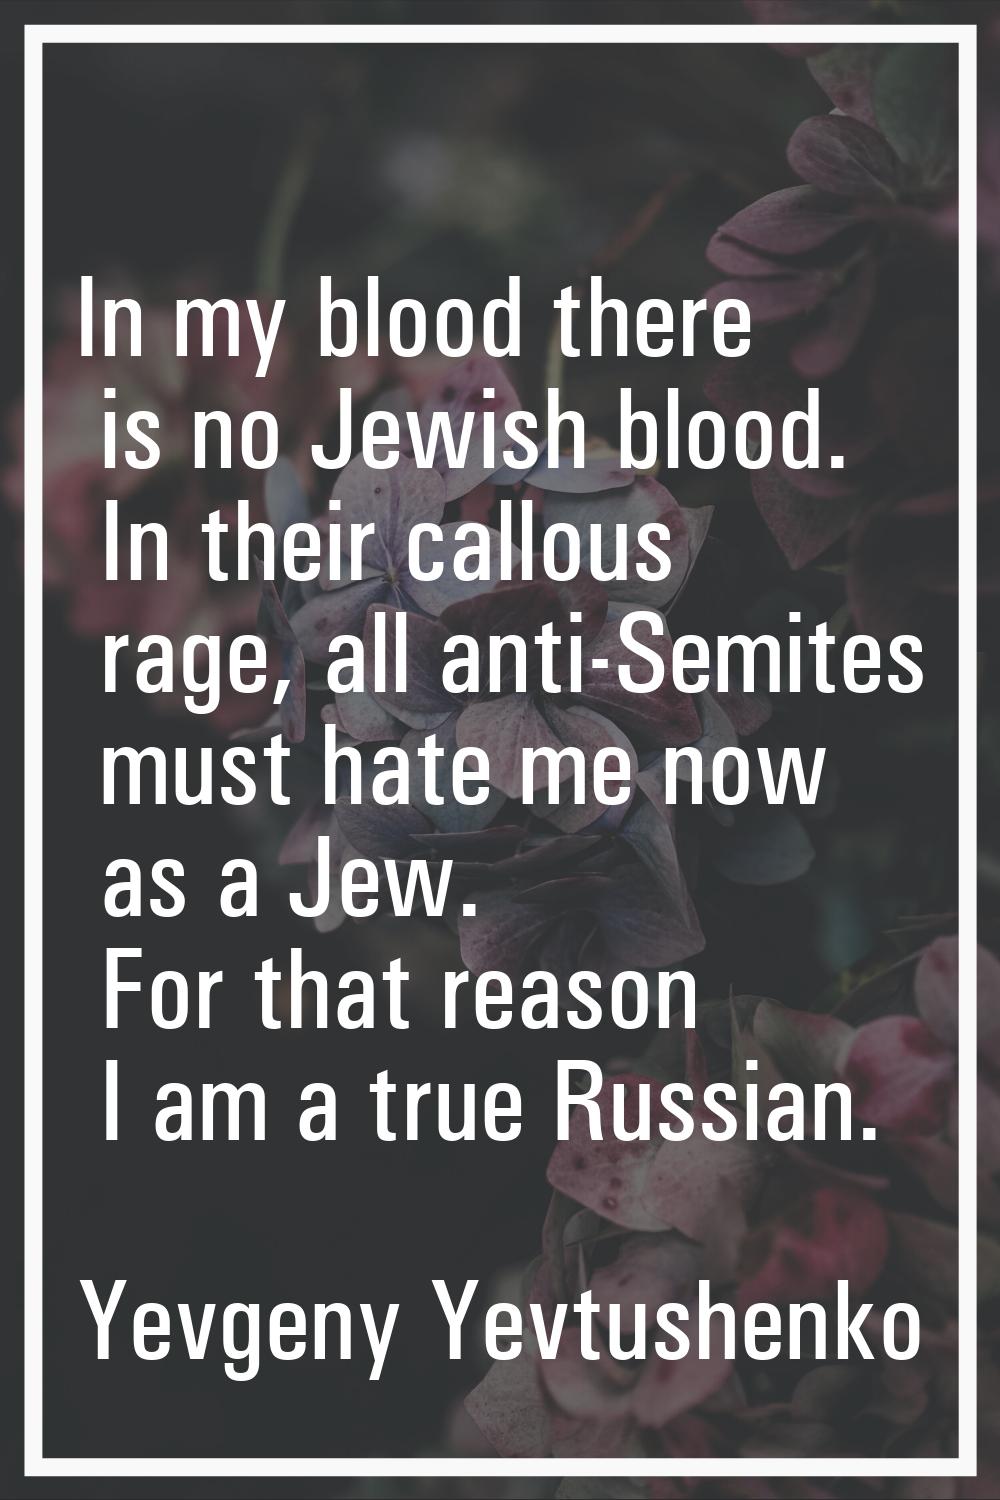 In my blood there is no Jewish blood. In their callous rage, all anti-Semites must hate me now as a